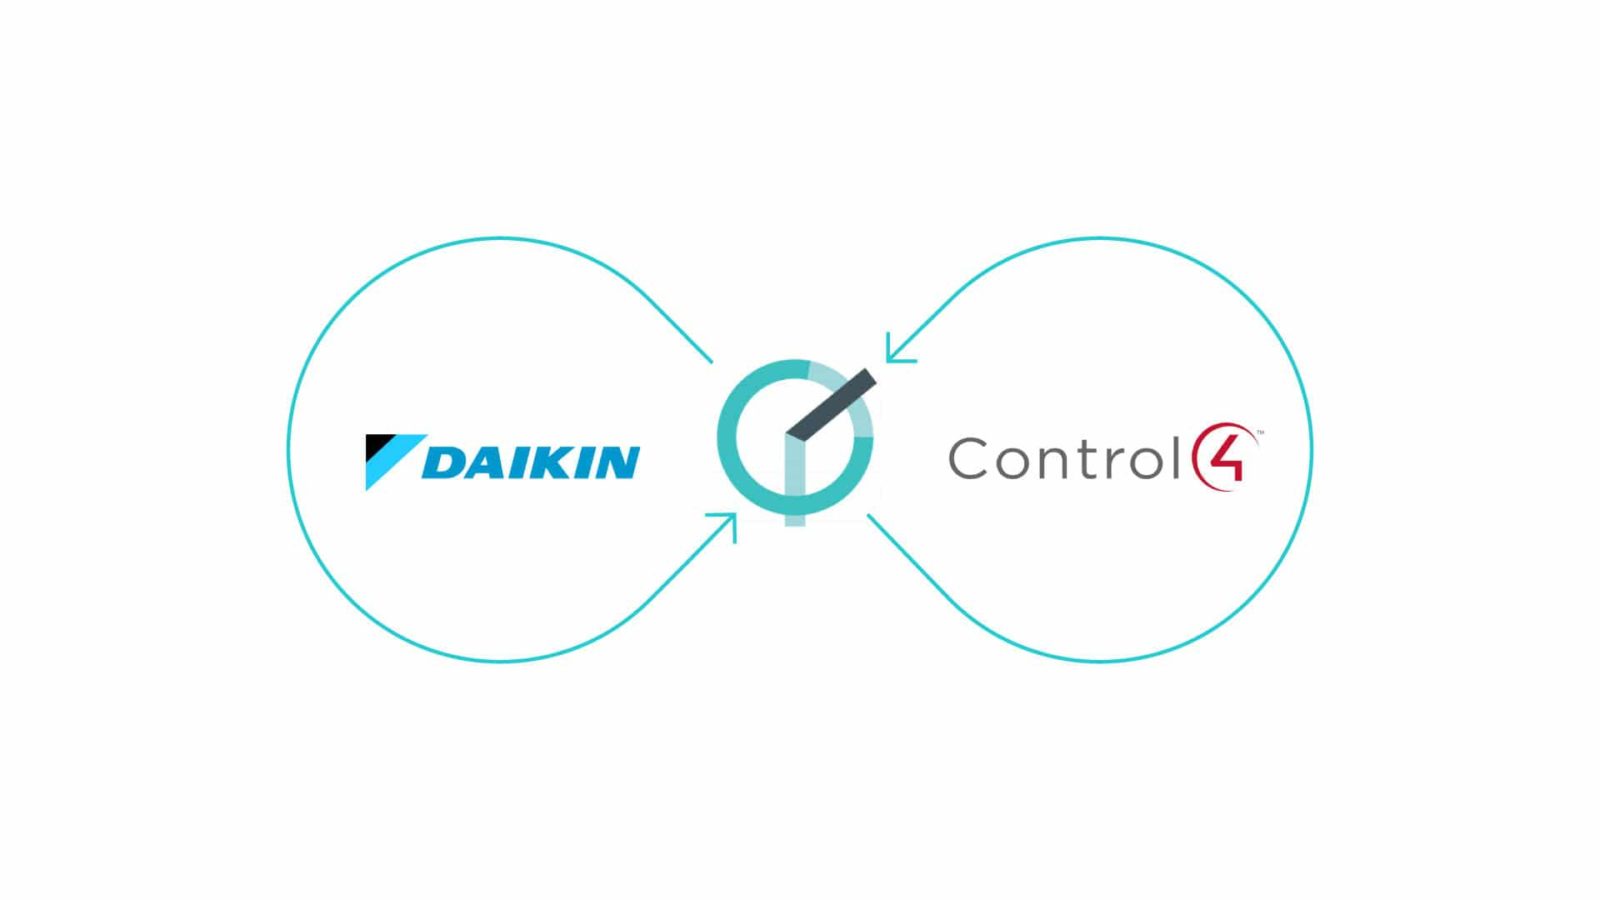 Easily Integrate Control4 with Daikin VRV Using our New Guide!